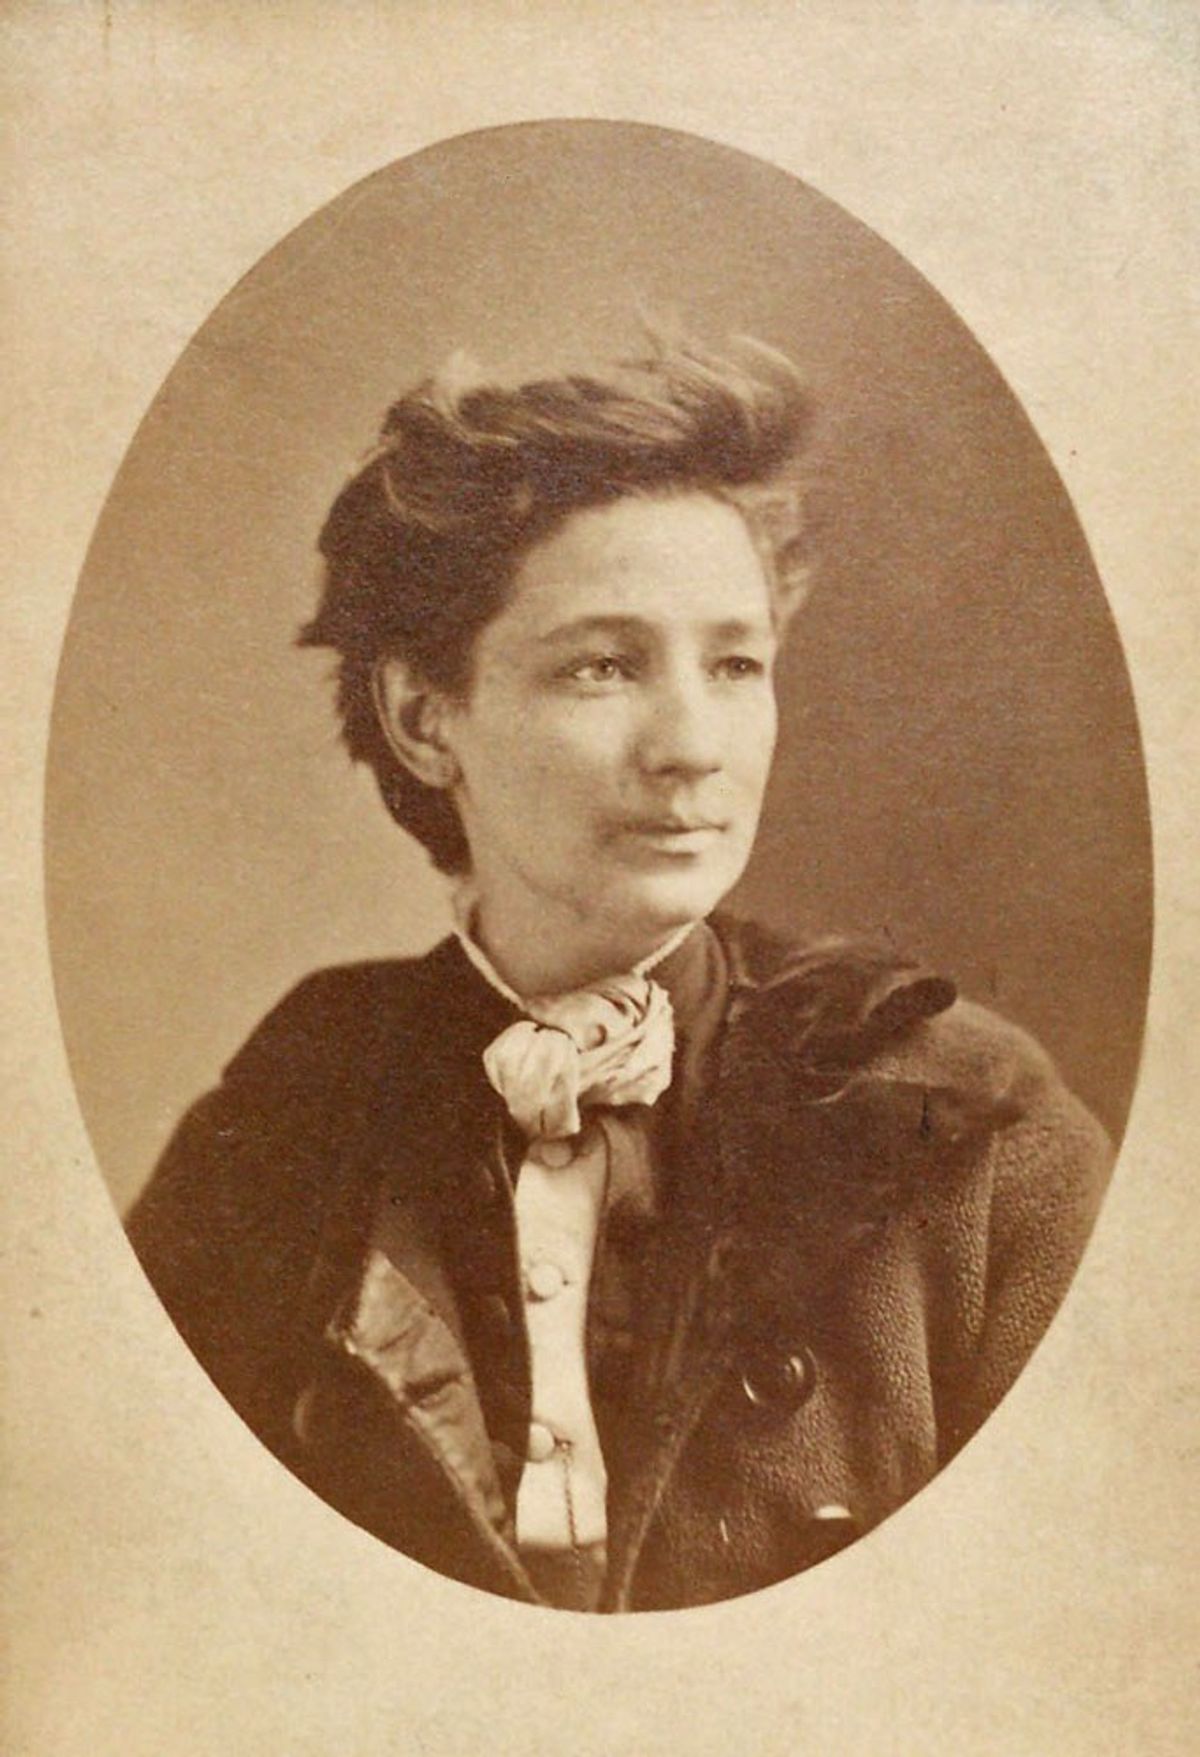 Meet Victoria Woodhull: The First Woman To Run For President